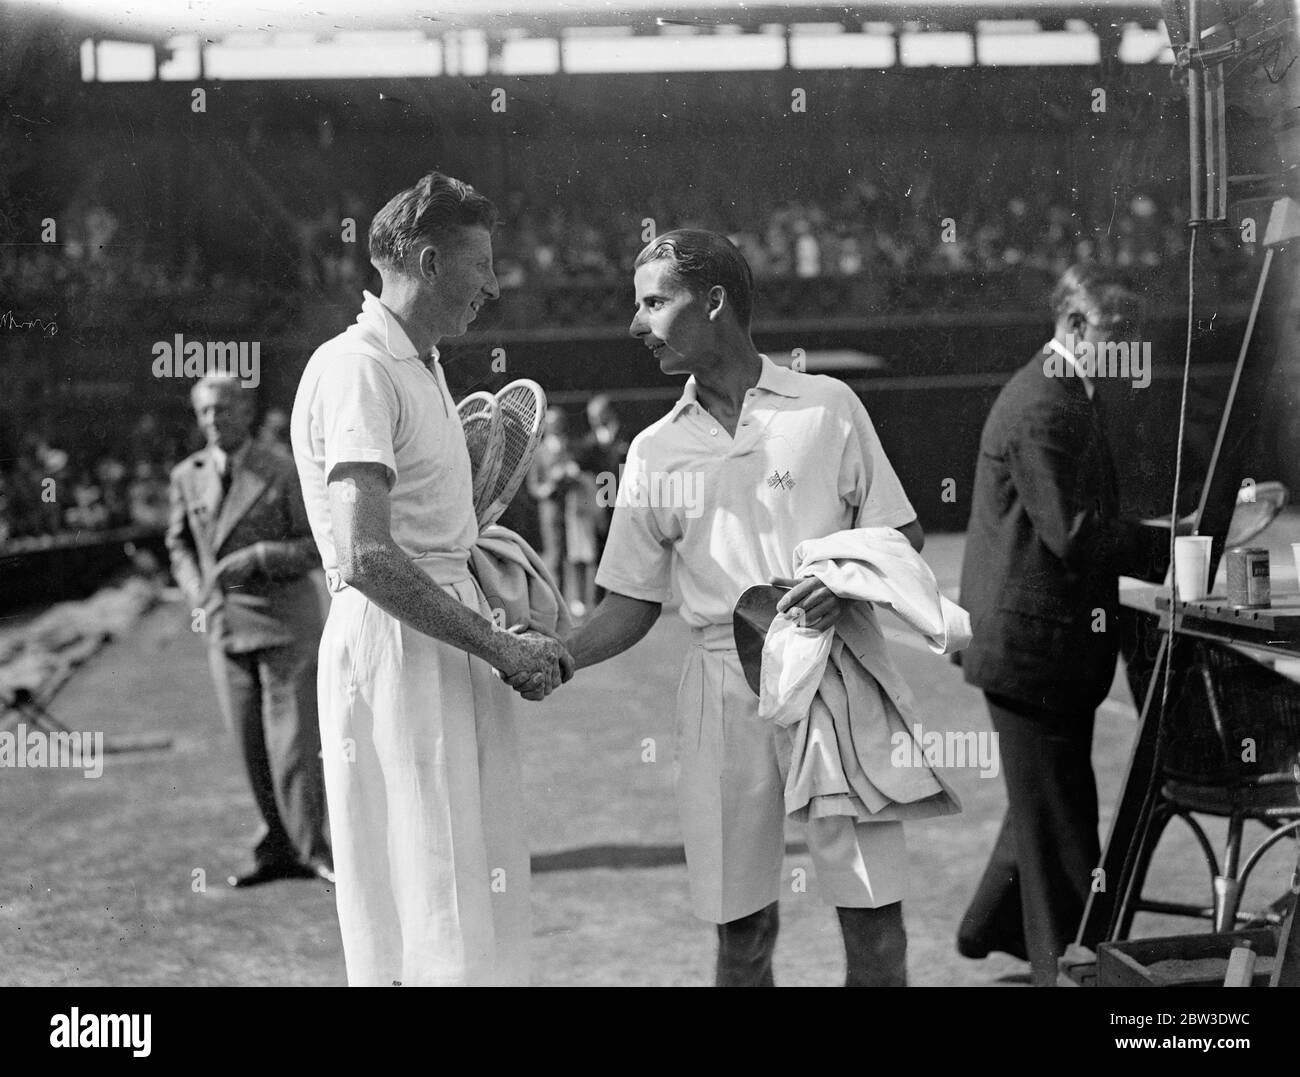 The challenge round of the Davis Cup between Great Britain , the holders and America was opened at Wimbledon Bunny Austin of Great Britain played and defeated Donald Budge of America . Photo shows the two players shaking hands after the match . 27 July 1935 Stock Photo